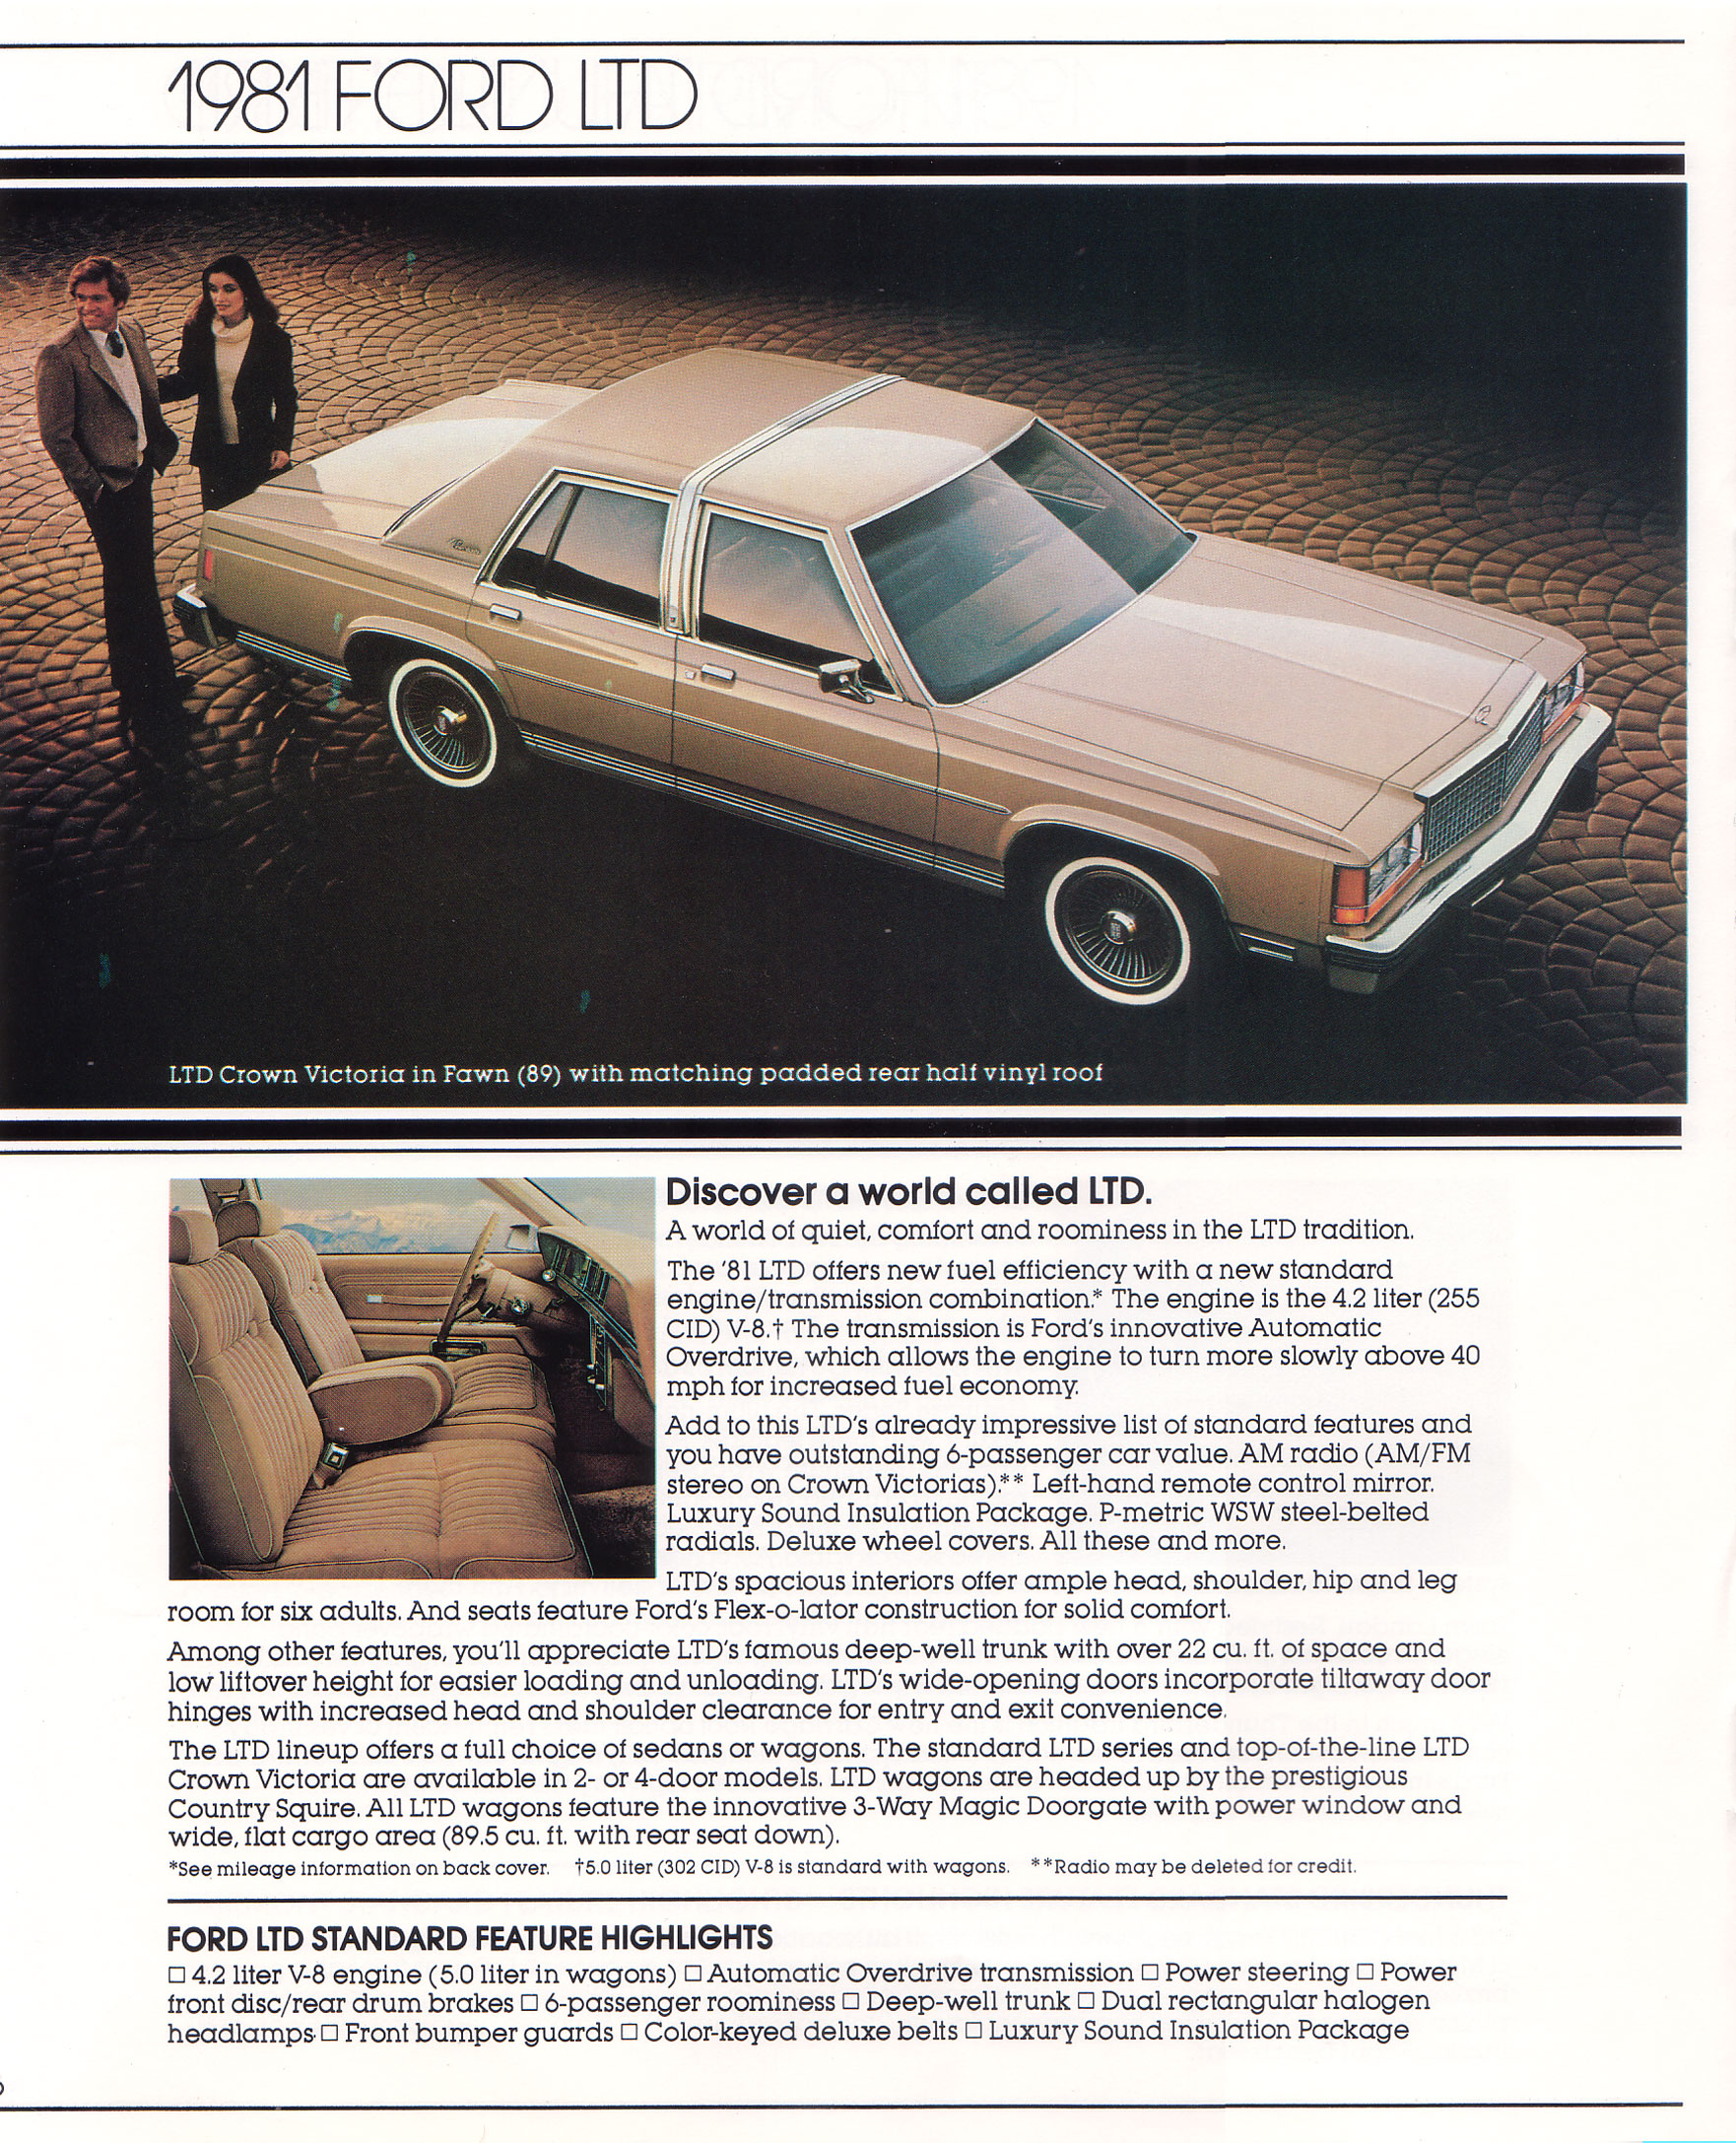 1981_Ford_Better_Ideas-06